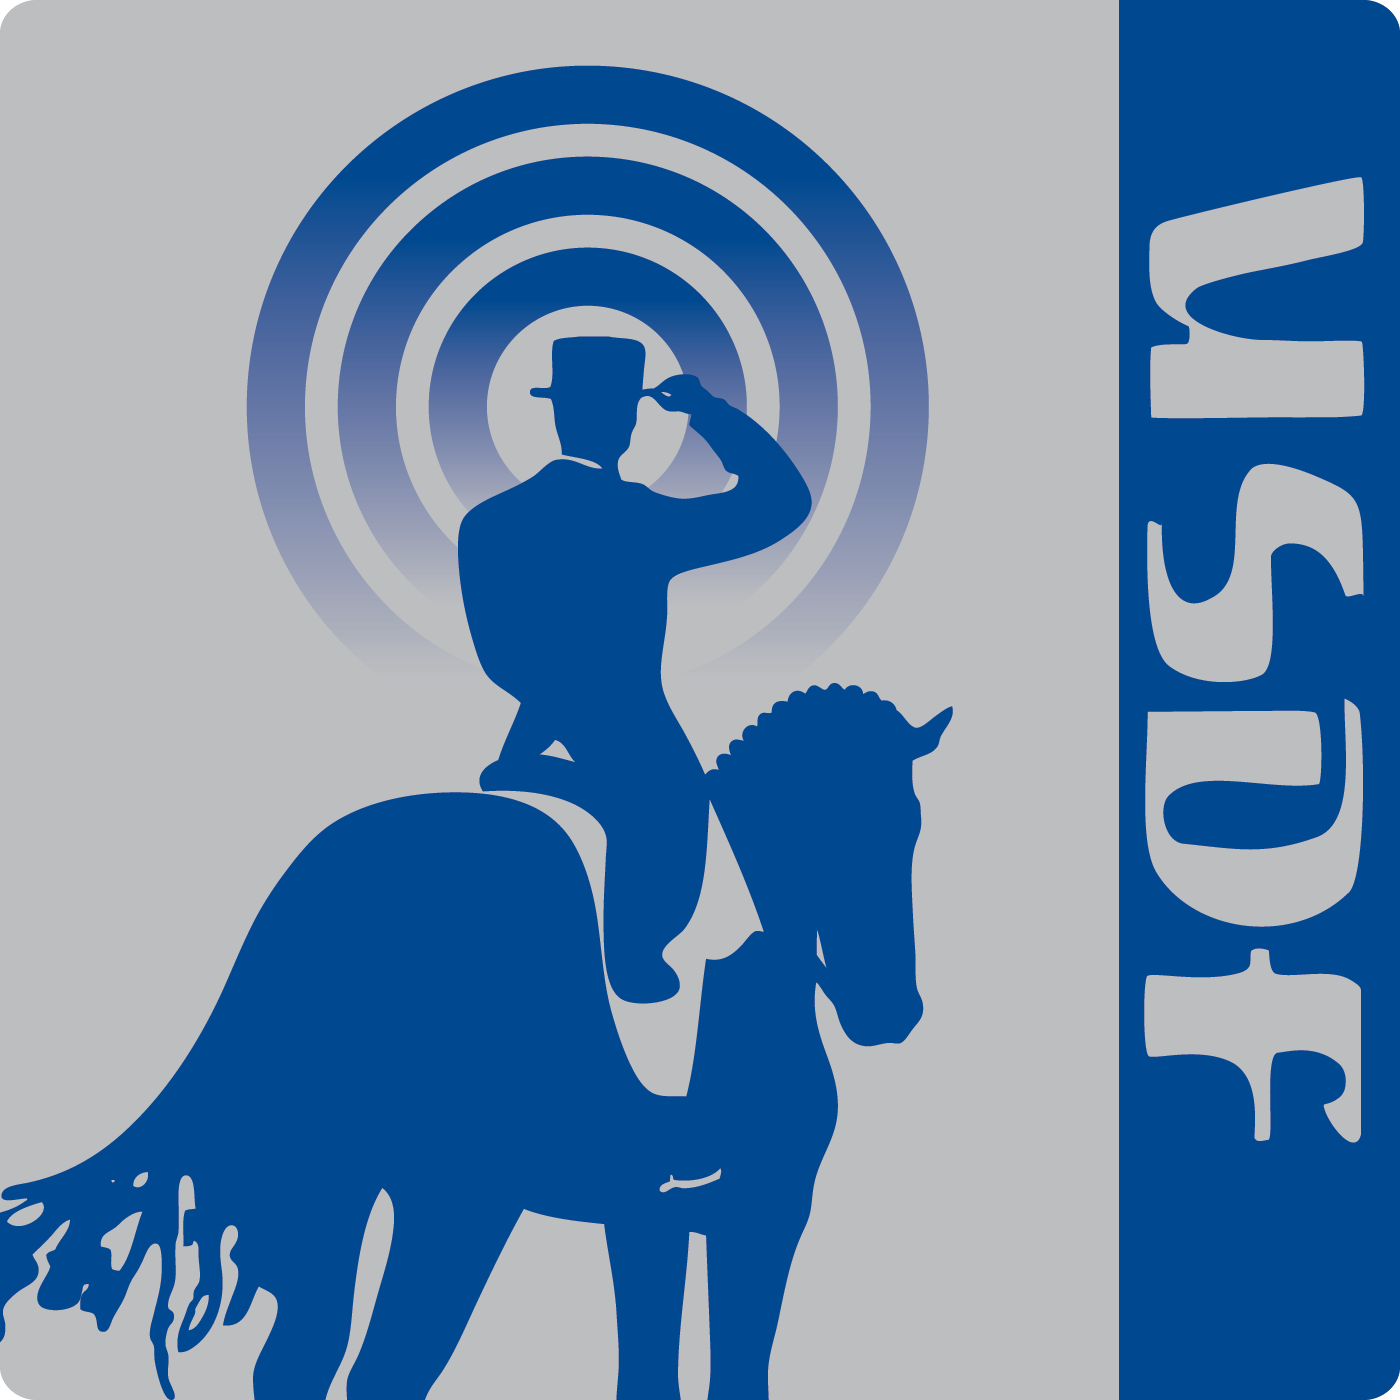 USDF Episode 81: Reflecting on the Evolution of Pan Am Games with Jessica Ransehousen/Show Ring Etiquette 